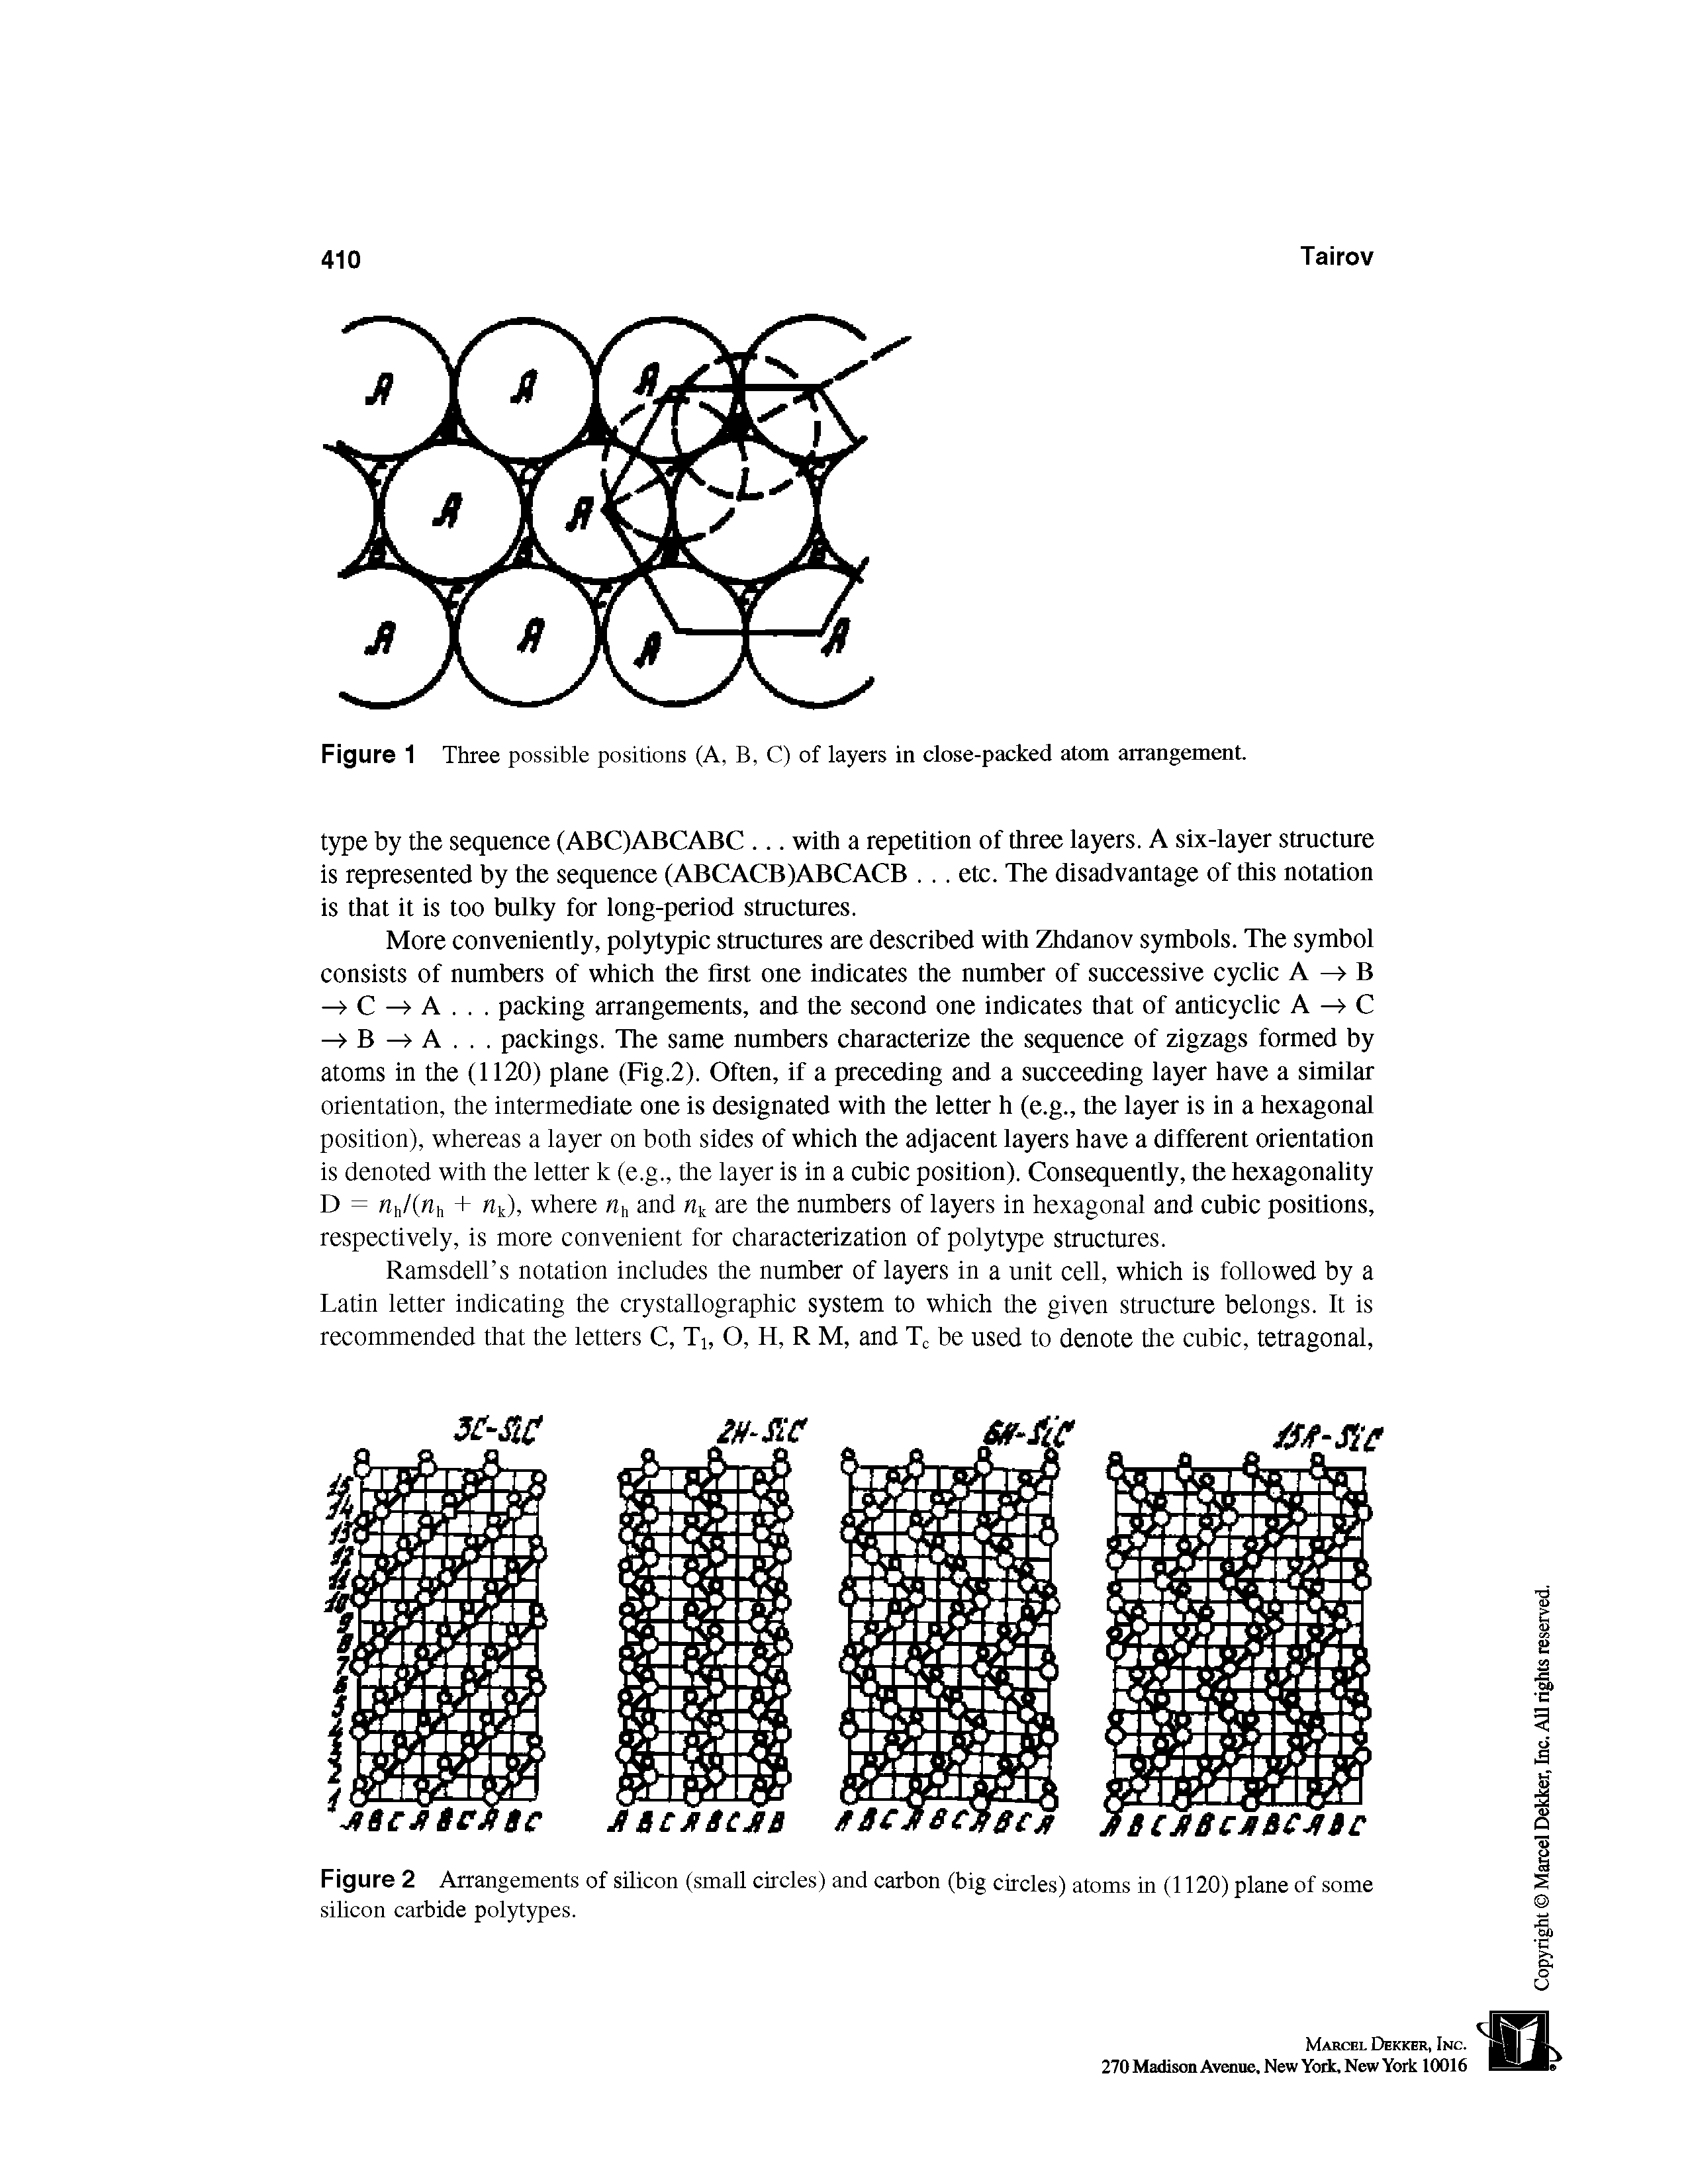 Figure 2 Arrangements of silicon (small circles) and carbon (big circles) atoms in (1120) plane of some silicon carbide polytypes.